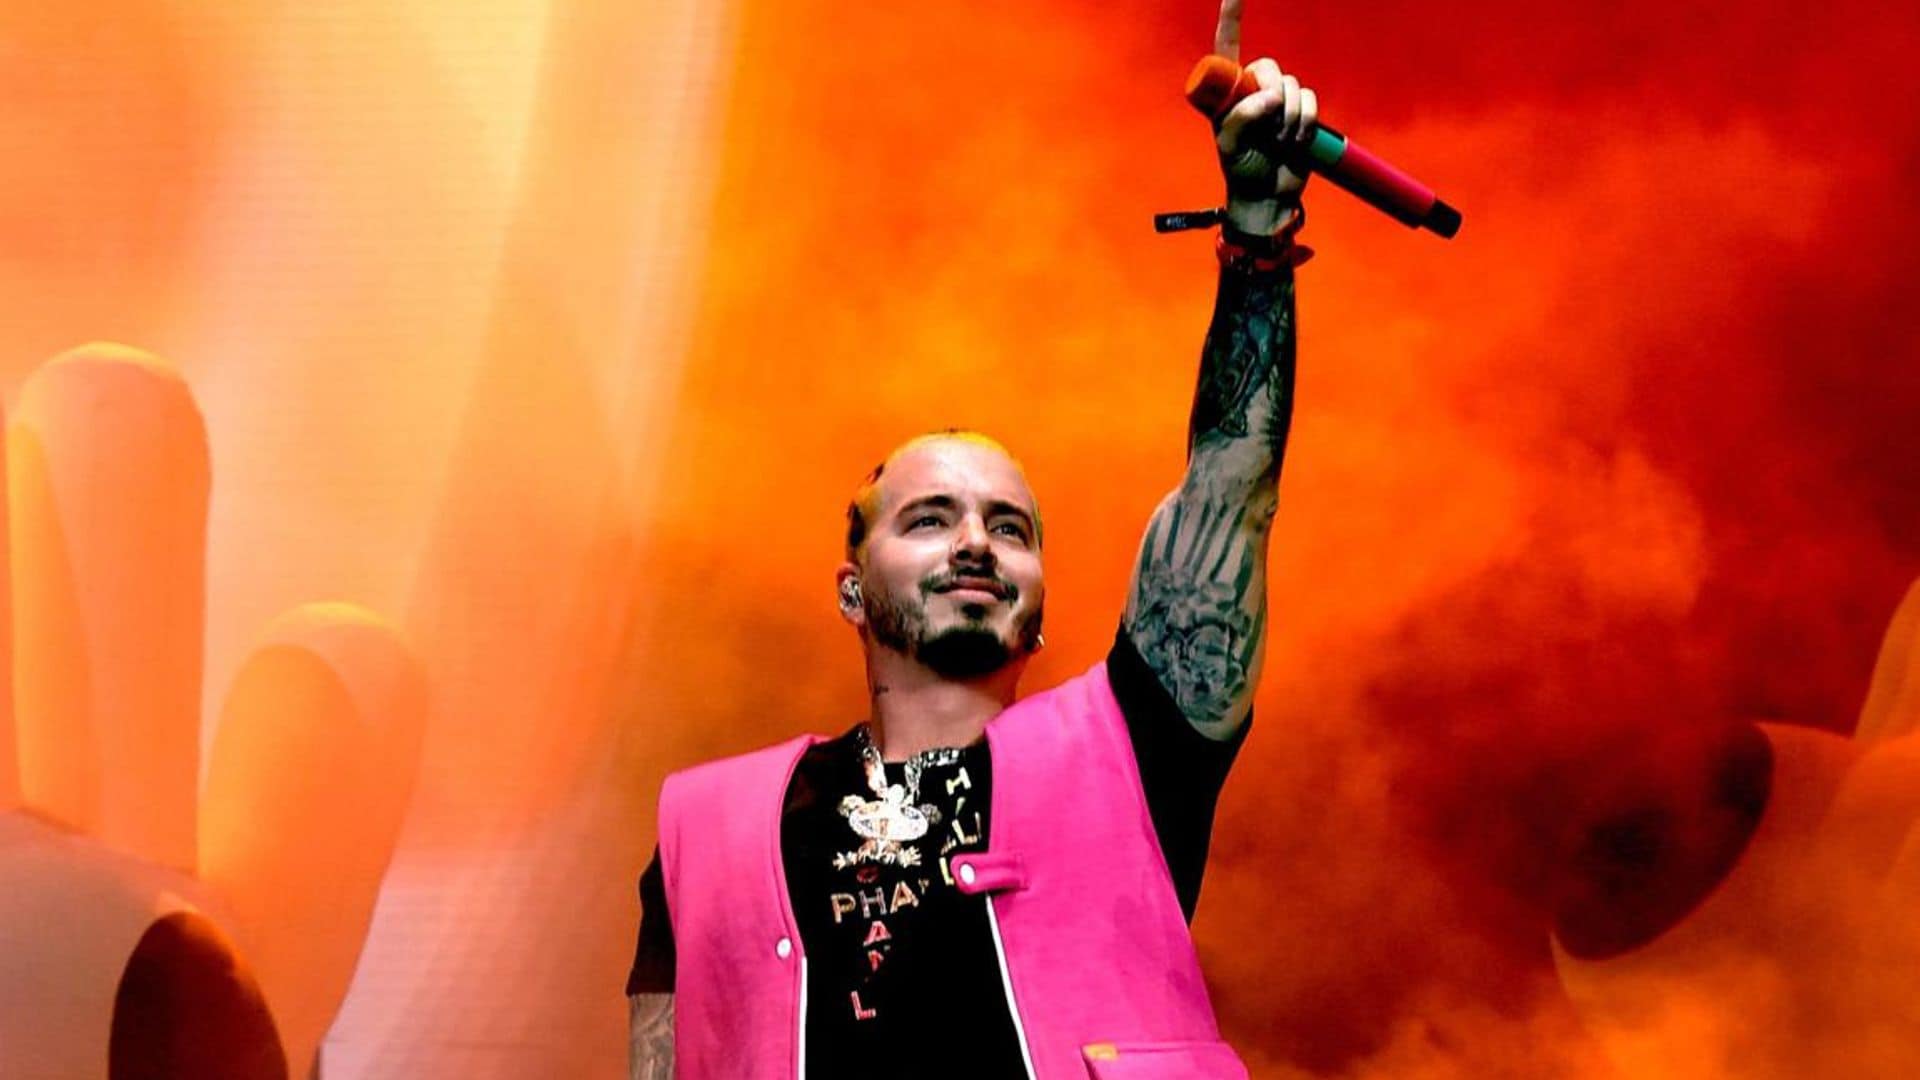 J Balvin urges Latinos to ‘do better’ and shares support for the Black Lives Matter movement